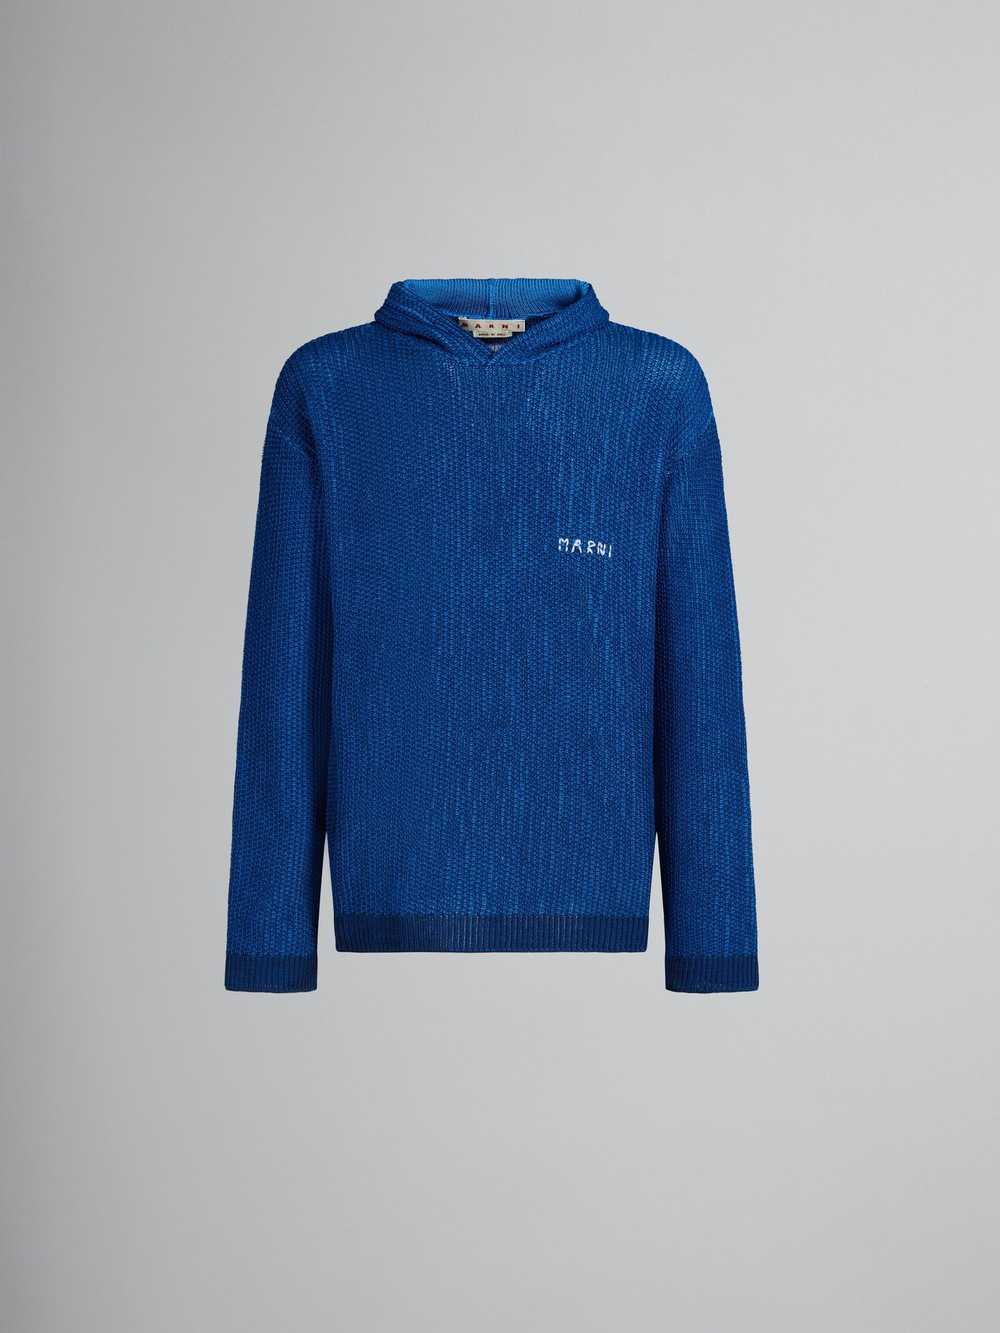 Marni o1w1db10524 Knitted Cotton Hoodie in Blue - image 1